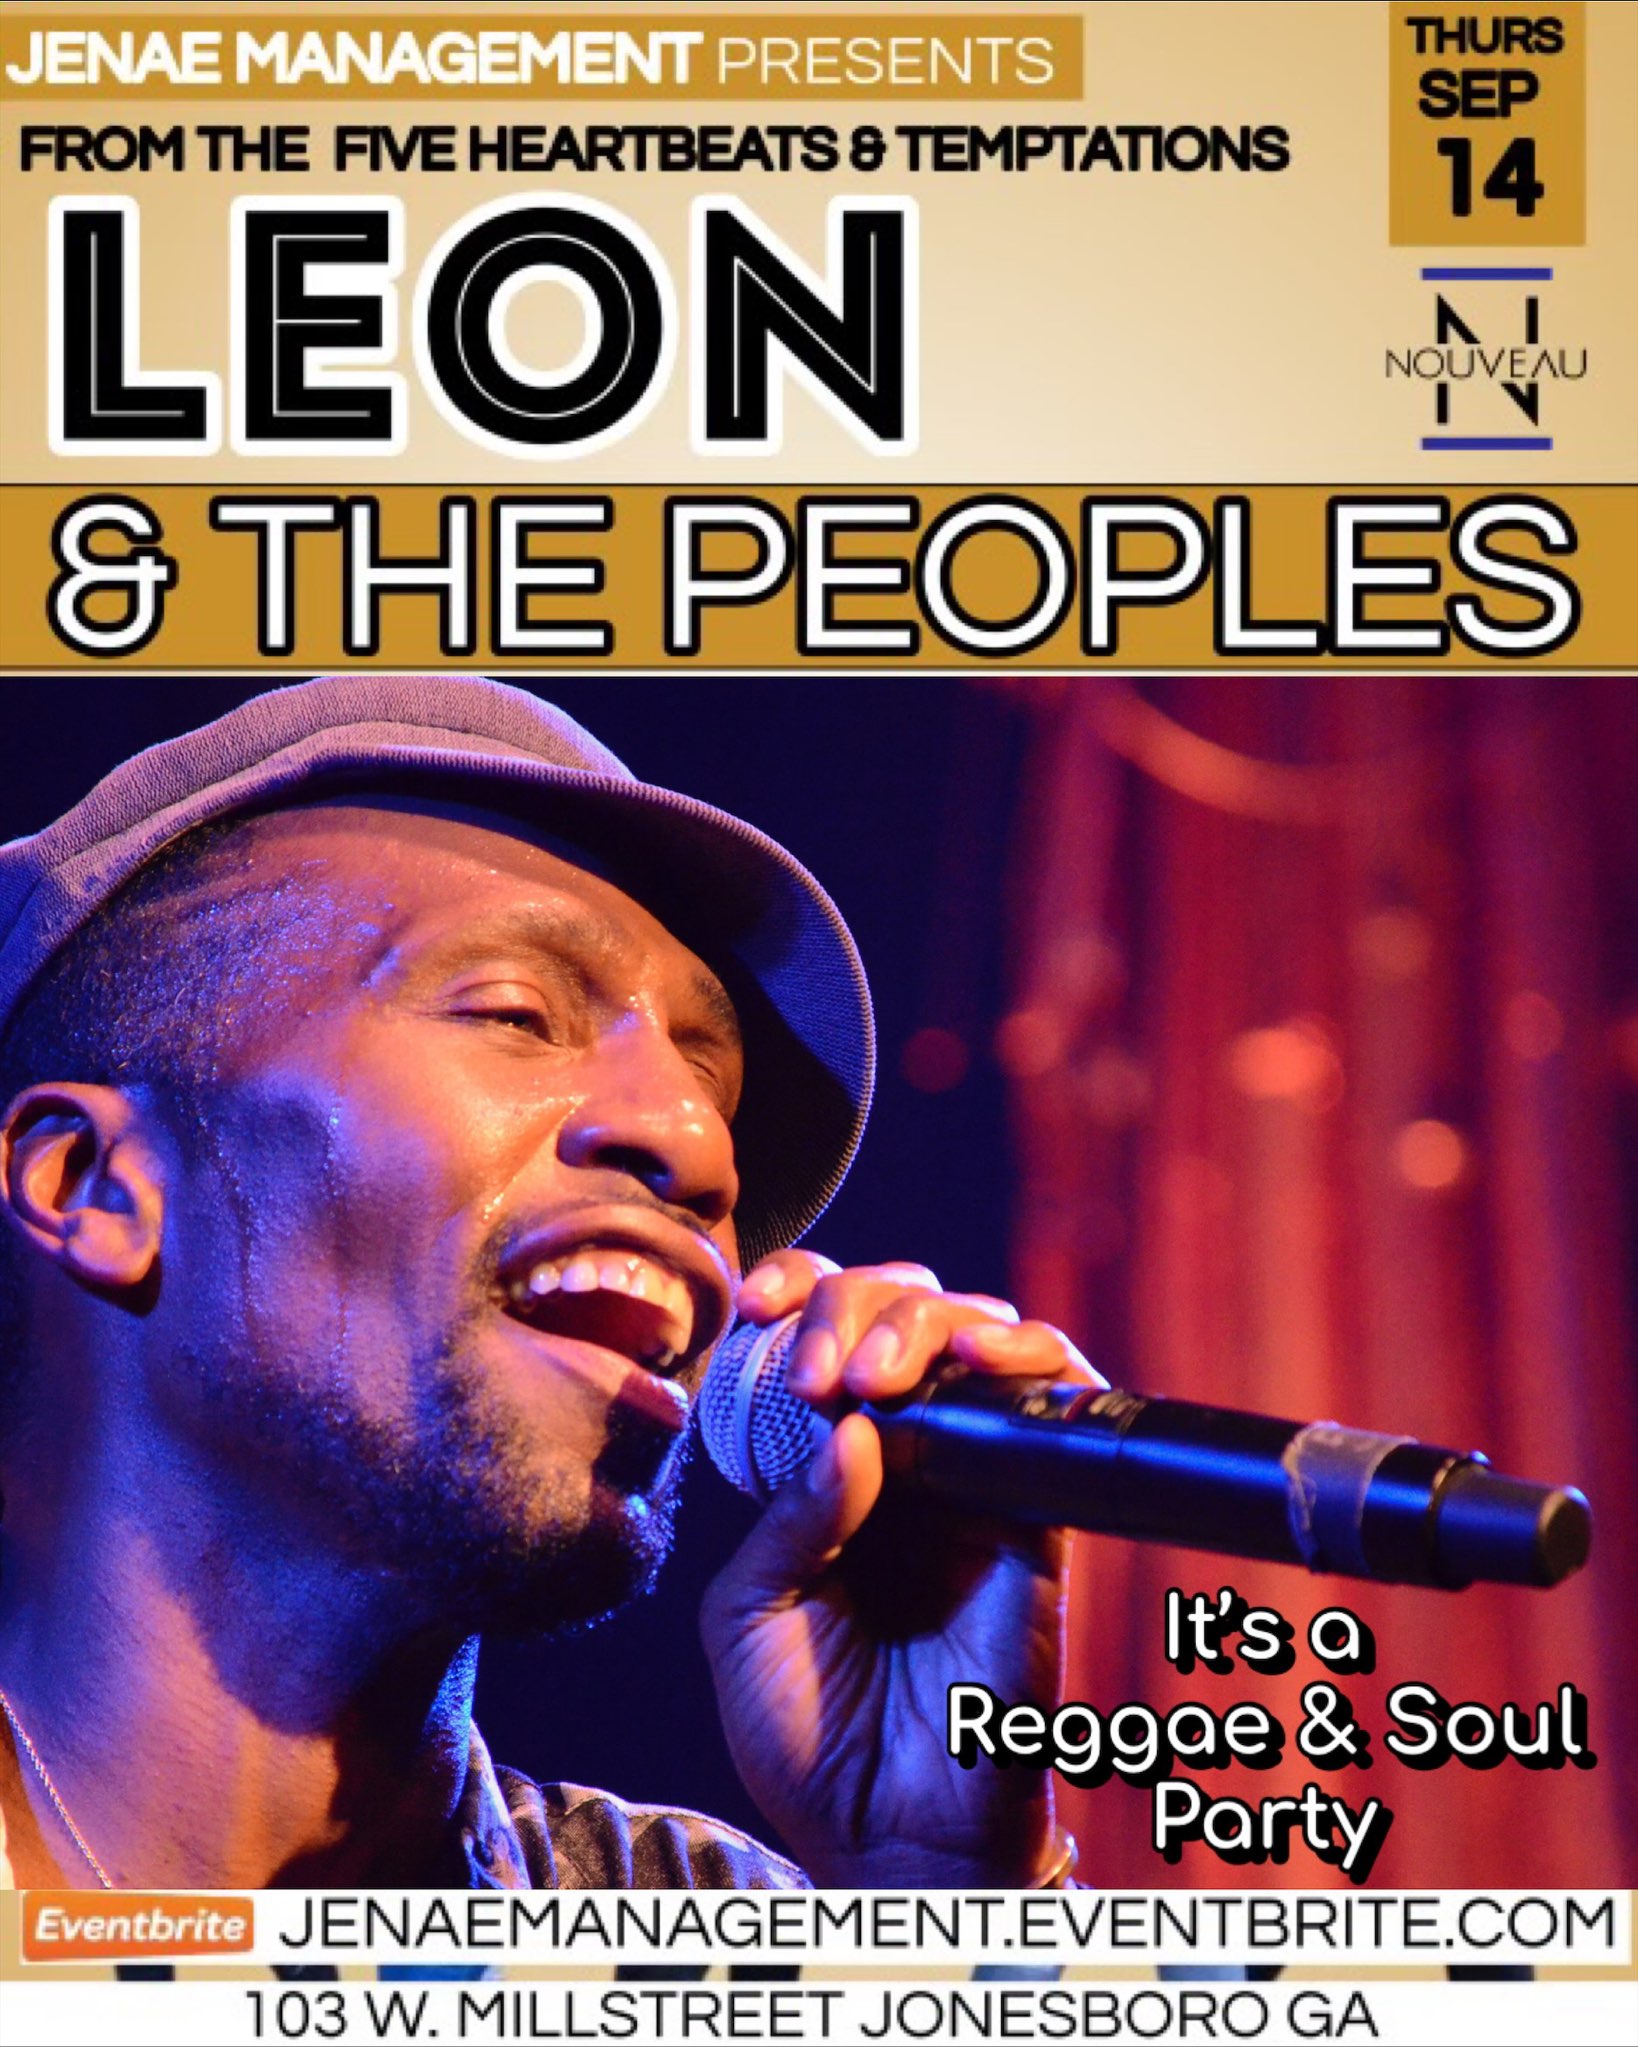 Jenae Management Presents From The Five Heartbeats & Temptations LEON & THE PEOPLES